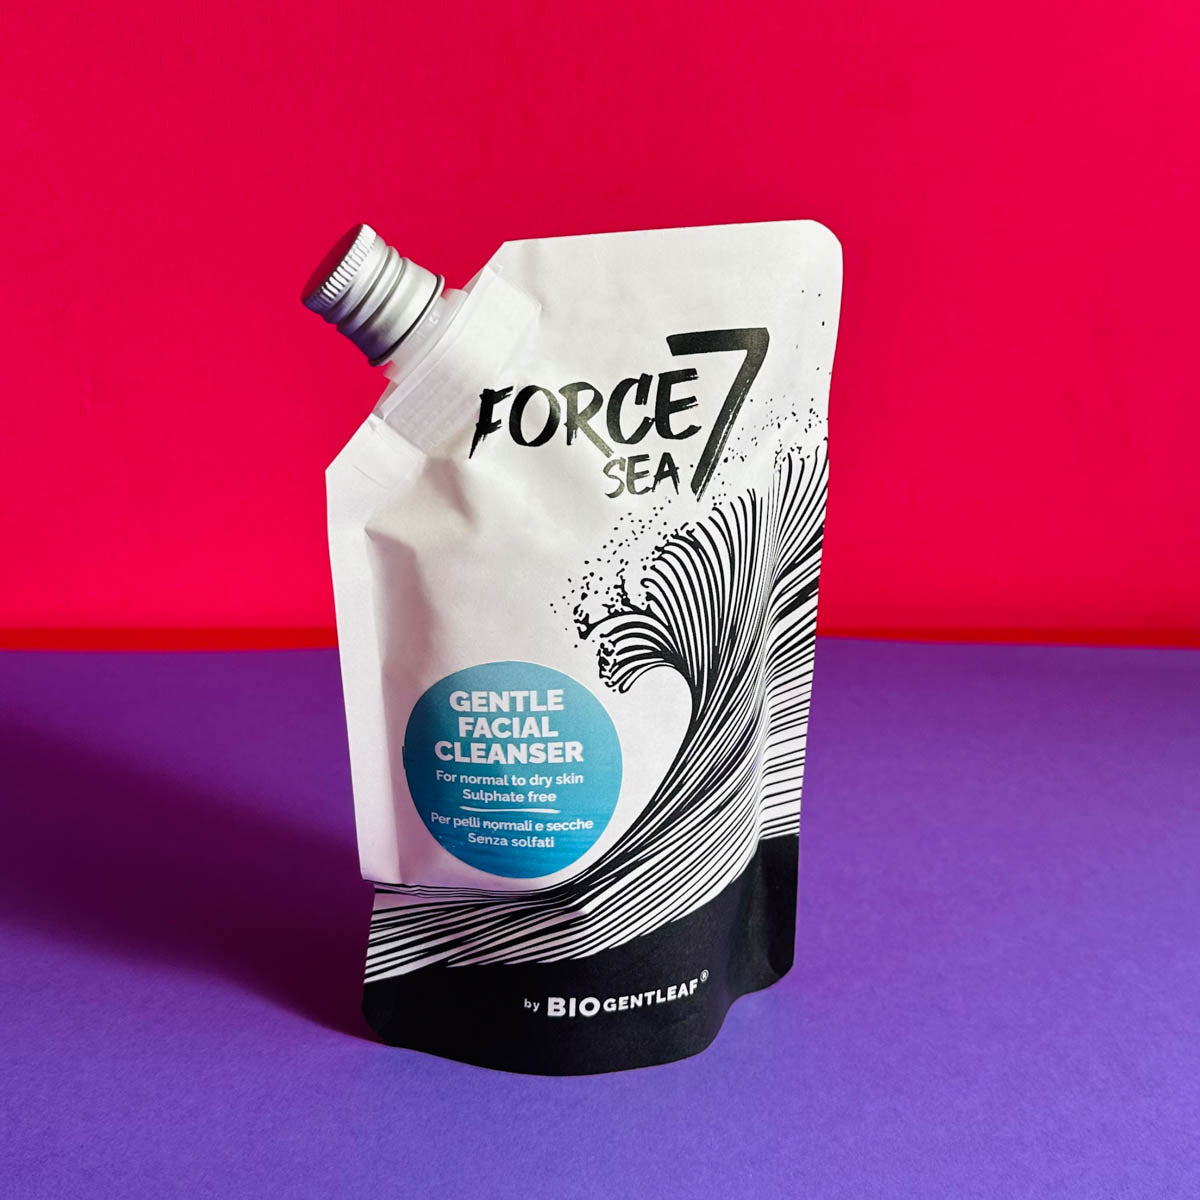 Gentle Facial Cleanser | Force 7 Sea - 200ml